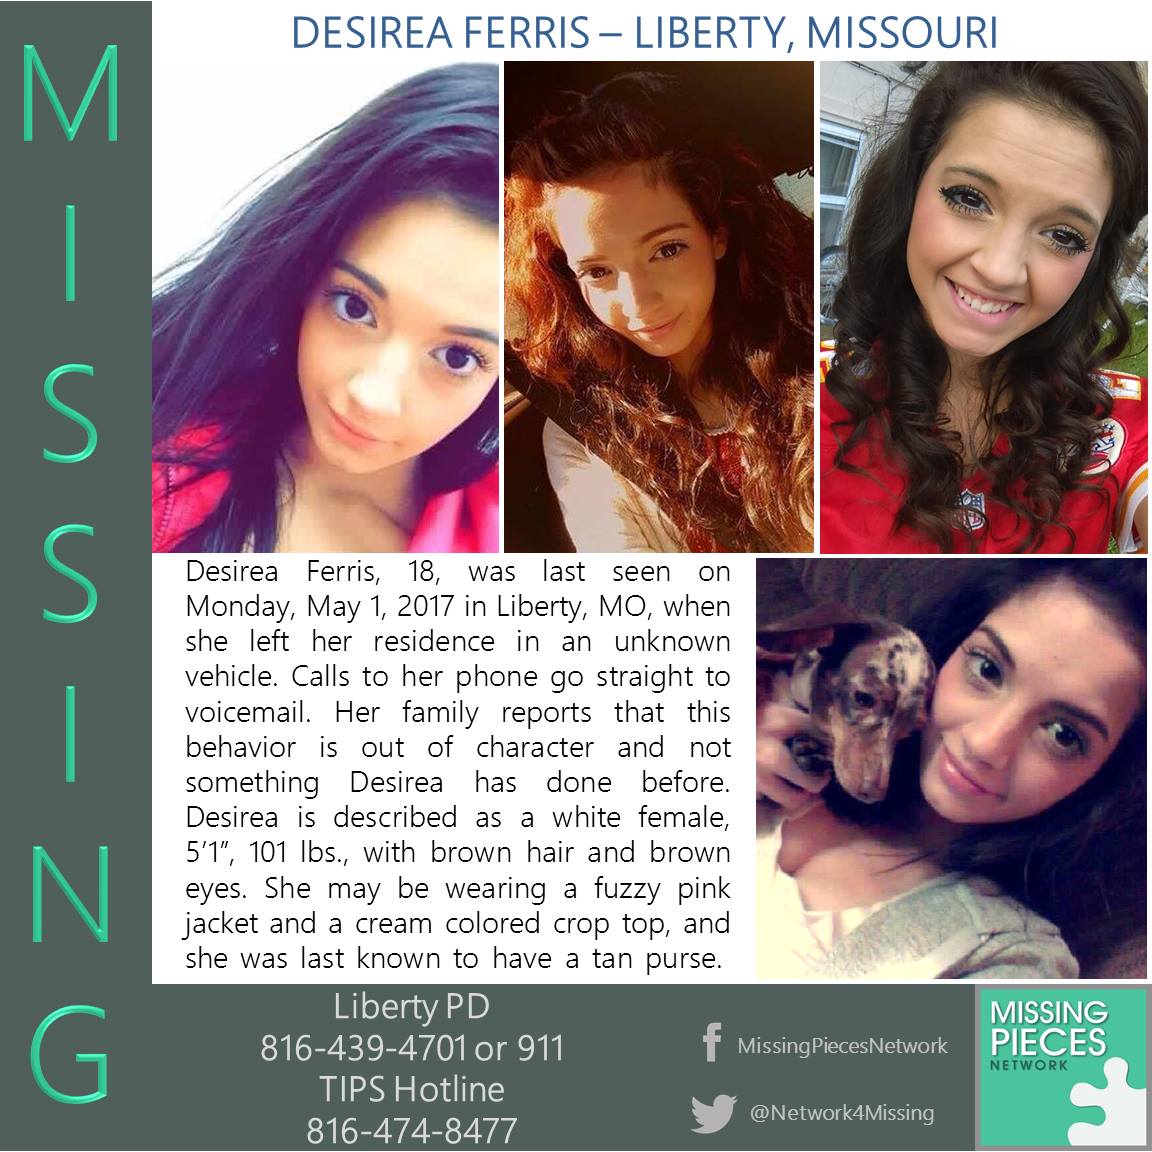 Missing girl, Desirea Ferris, picture and information